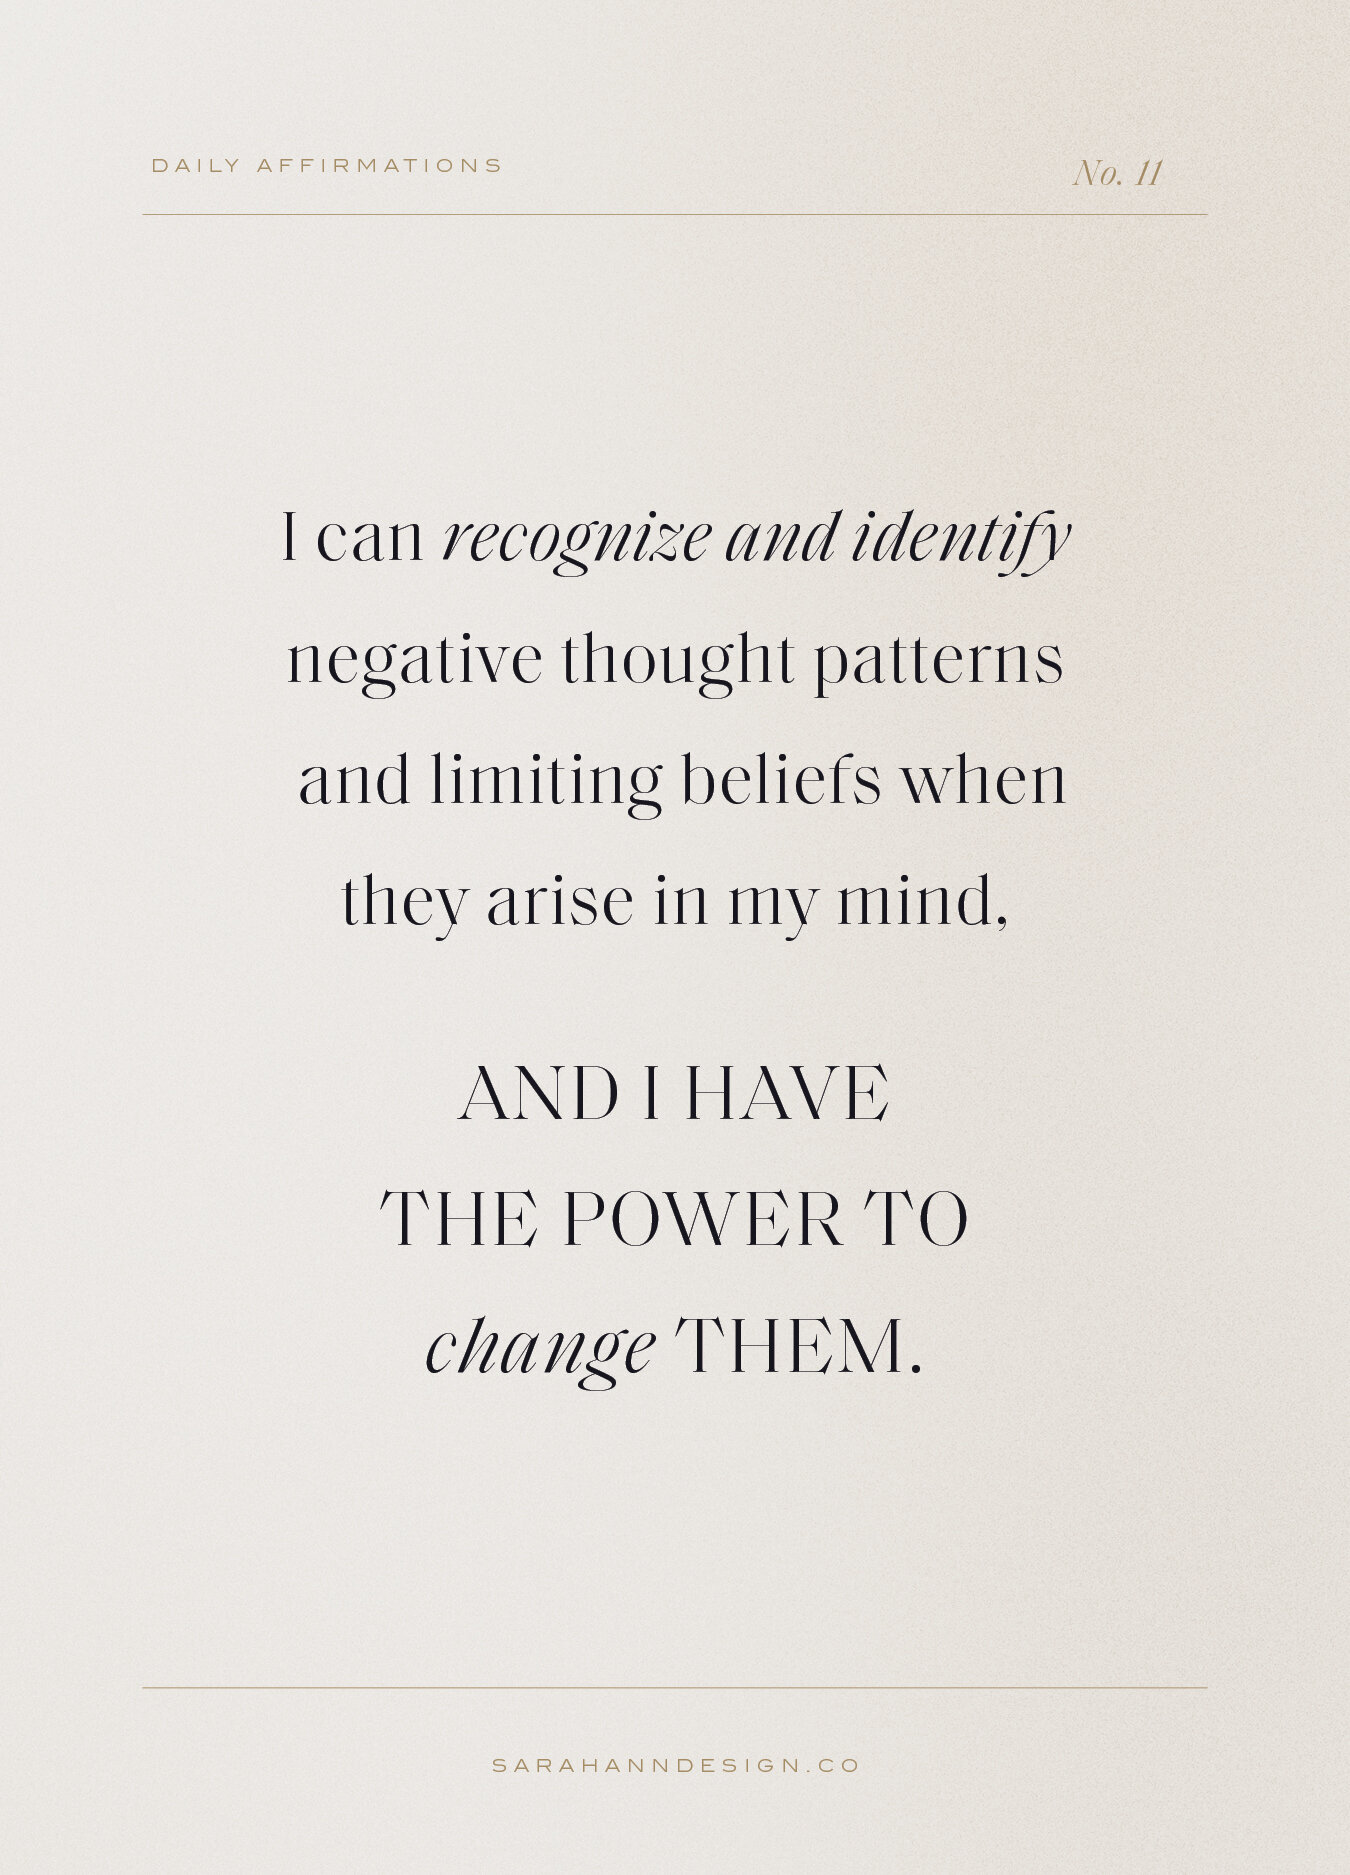 Daily Affirmations for the Creative Soul - Affirmations by Sarah Ann Design11